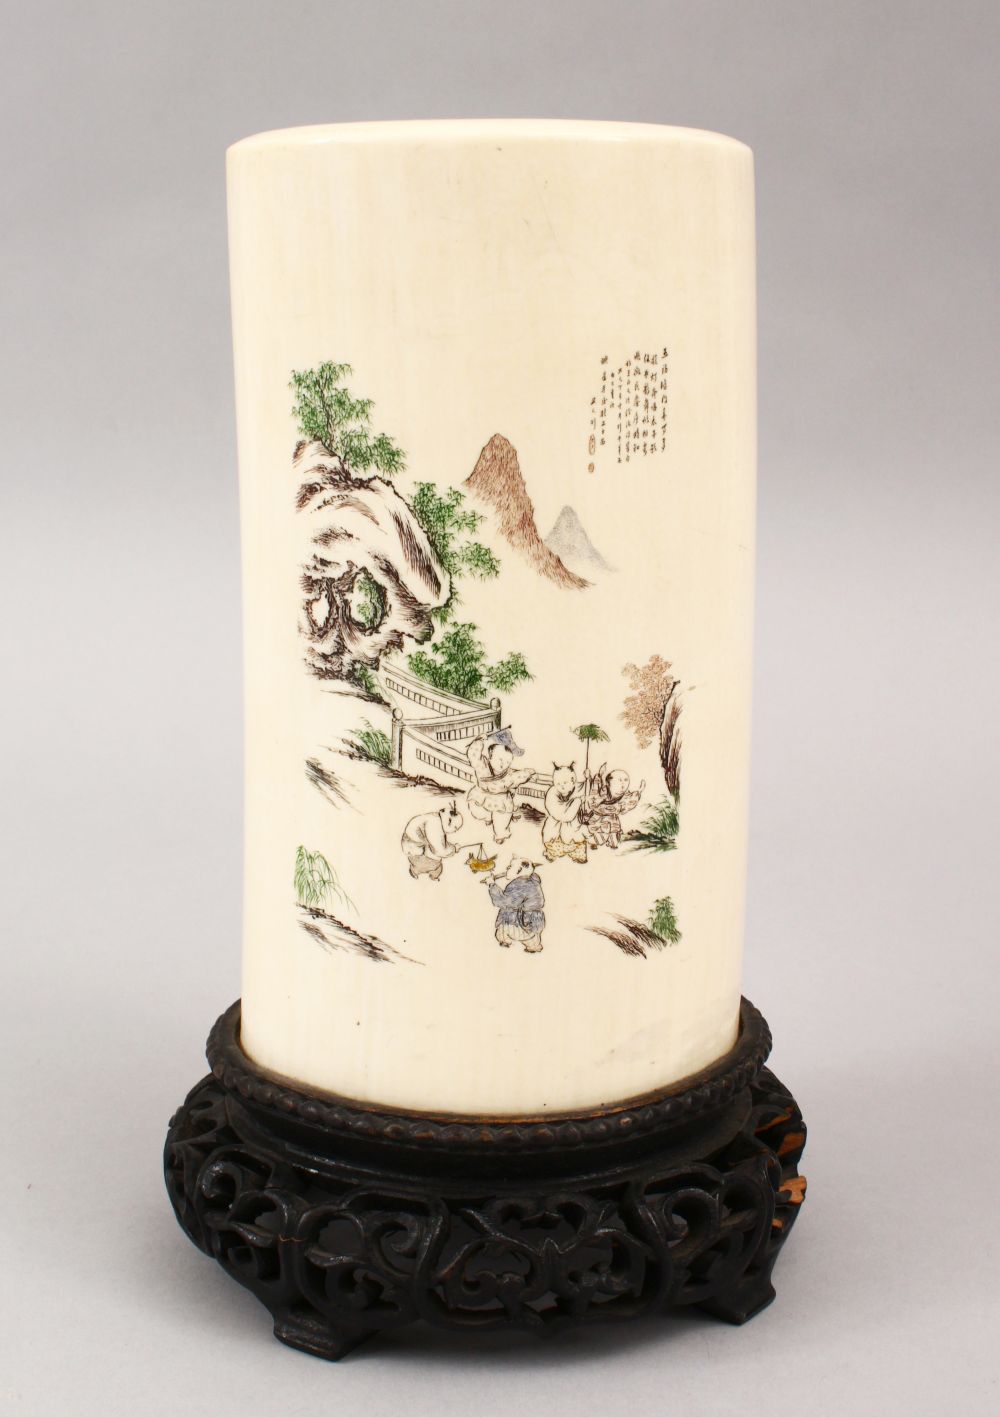 A GOOD CHINESE REPUBLIC PERIOD CARVED IVORY TUSK VASE ON STAND, the vase decorated with scenes of - Image 2 of 15